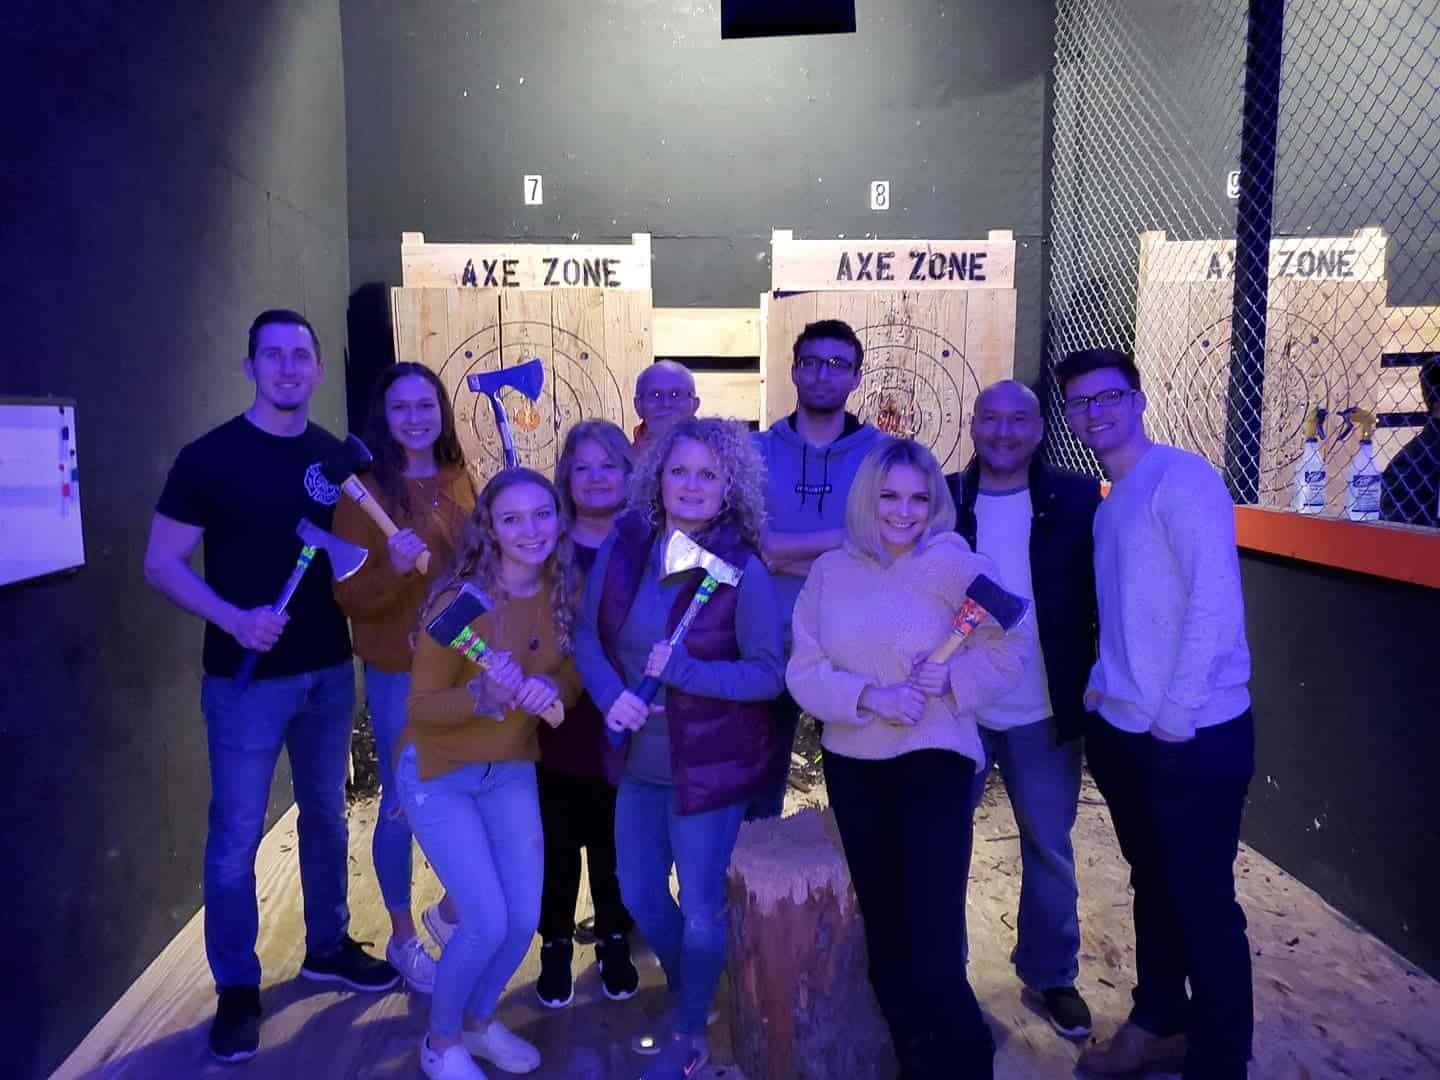 Company axe throwing event near chicago